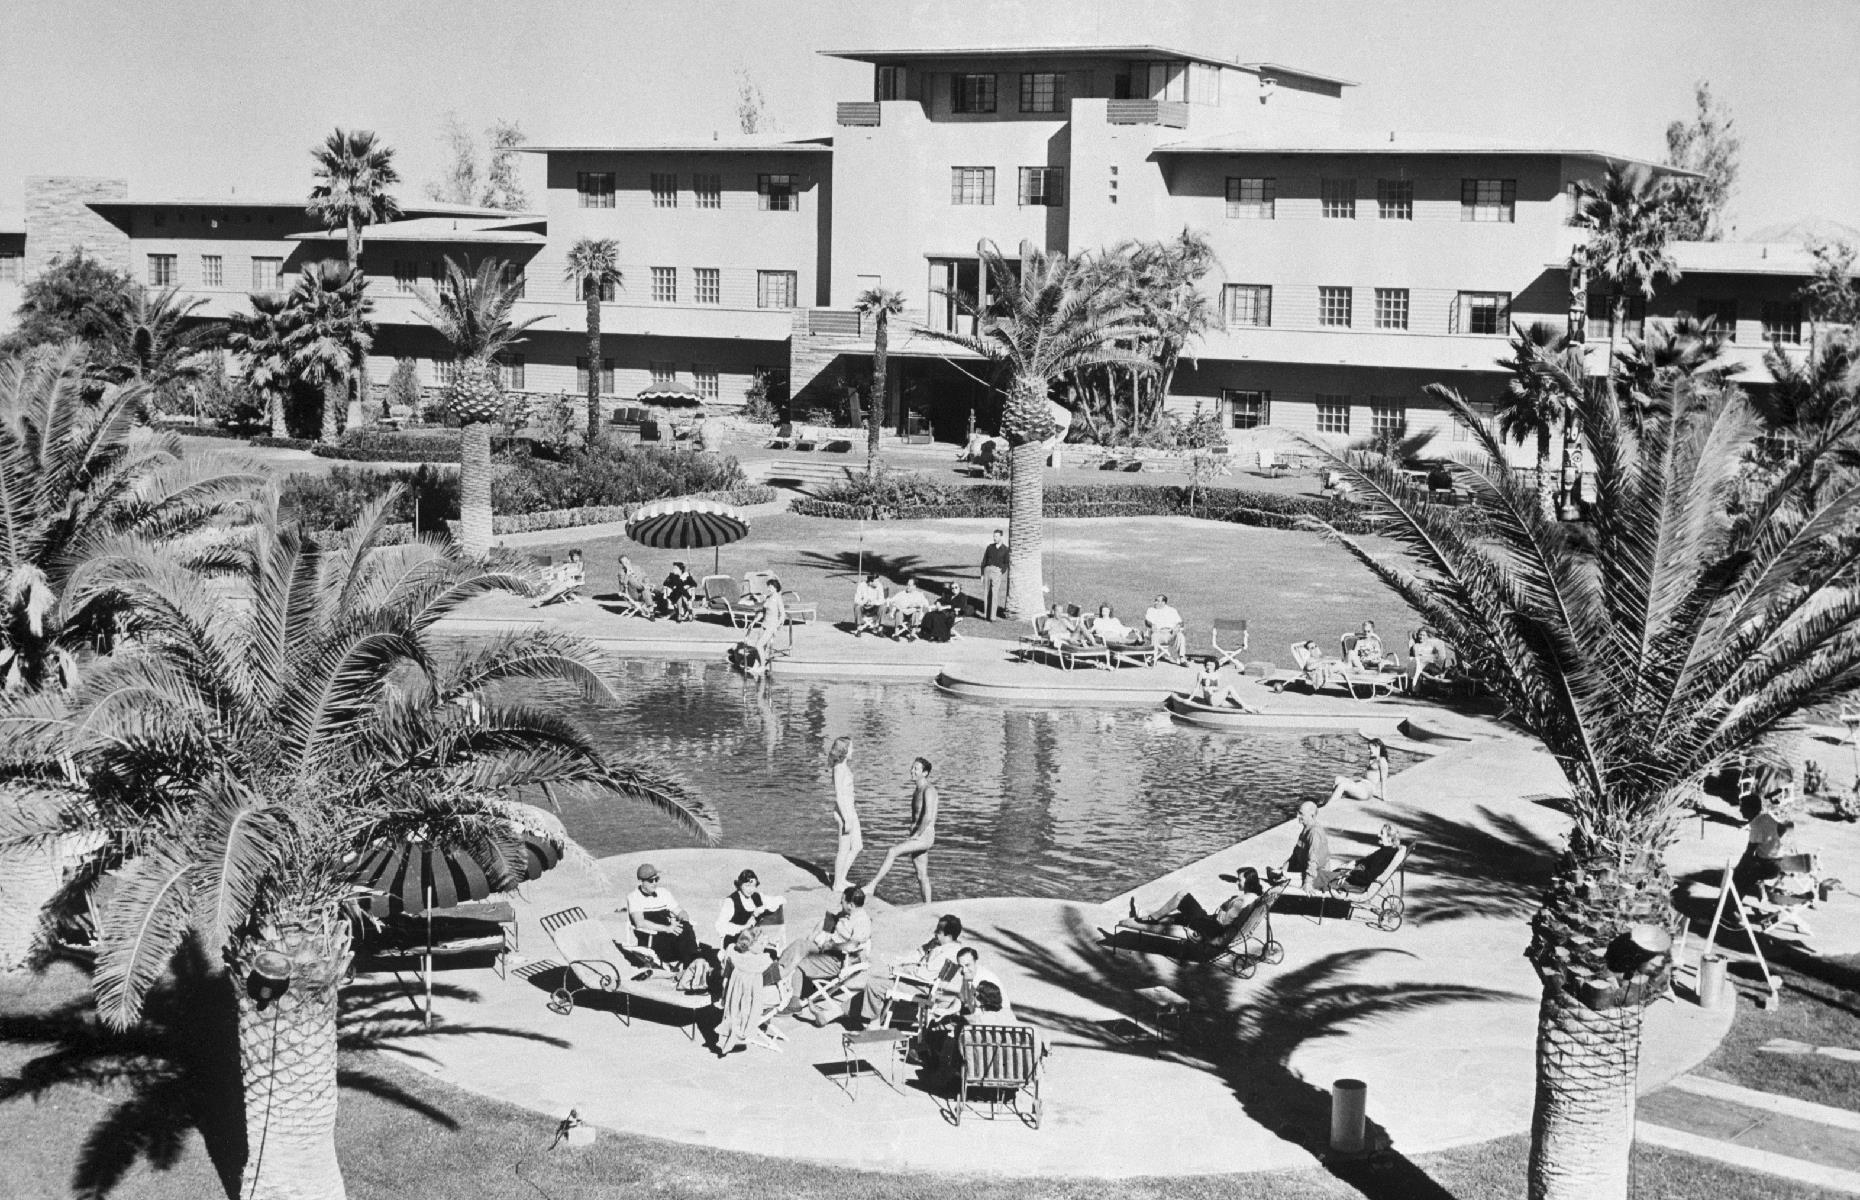 <p>The legendary Flamingo Las Vegas (still in operation) was one of the ritzy hotels to open during this period. Then tipped as a "playground of the elite", the hotel boasted a palm-dotted patio, a vast pool and plush accommodations. This aerial shot was taken in 1949 and sees glamorous vacationers sun themselves beside the water. </p>  <p><strong><a href="https://www.loveexploring.com/galleries/99342/sin-city-secrets-the-incredible-story-of-las-vegas?page=1">Read more Sin City secrets here</a></strong></p>